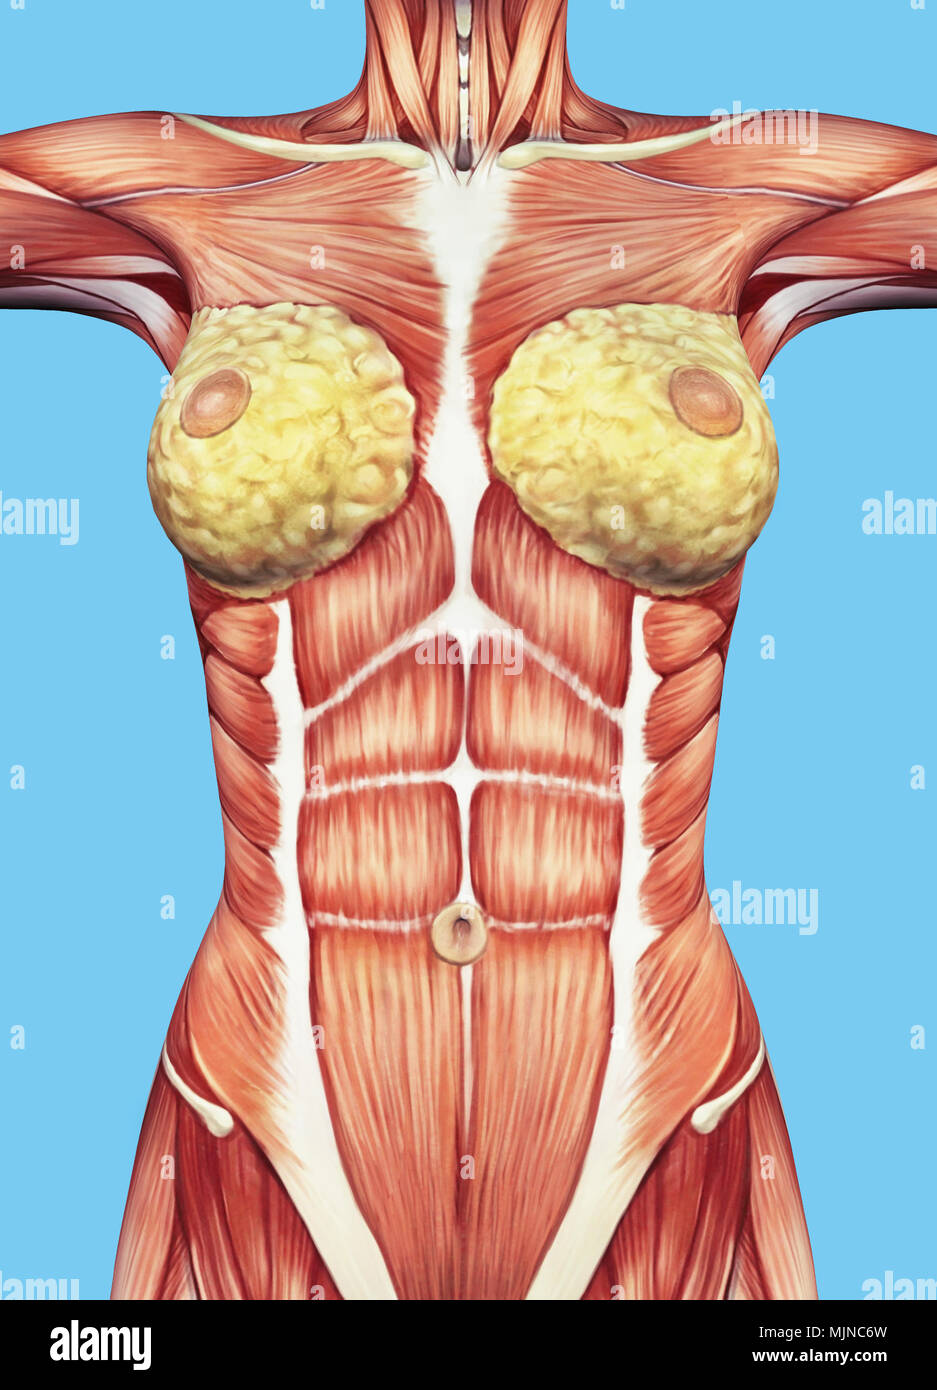 https://c8.alamy.com/comp/MJNC6W/anatomy-of-female-chest-and-torso-featuring-major-muscular-groups-and-glands-MJNC6W.jpg